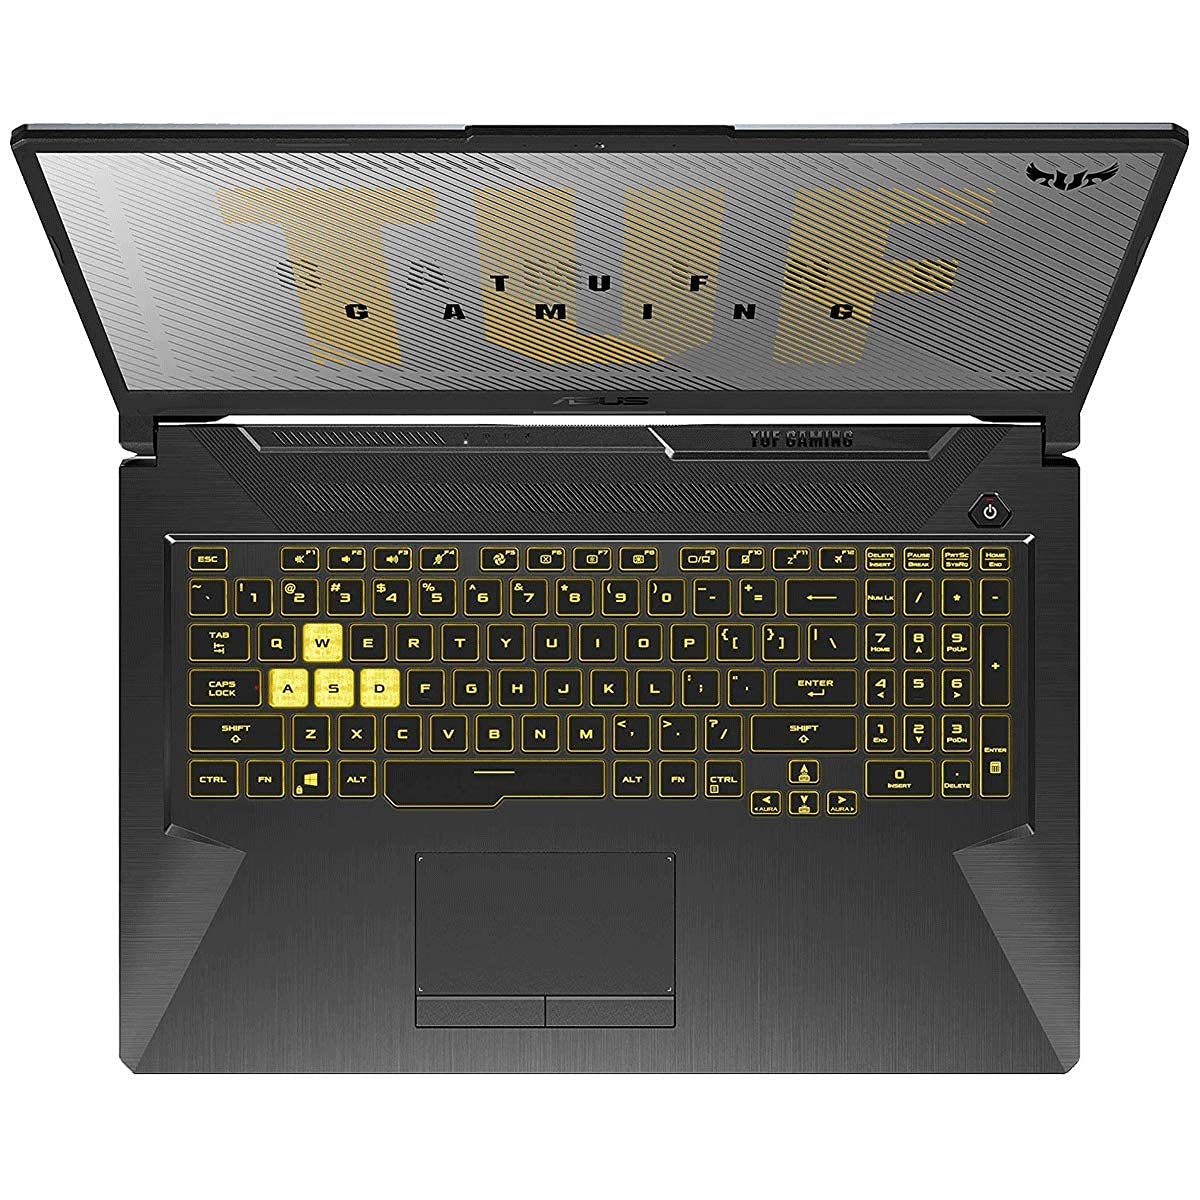 Asus Tuf Gaming F17 Offers